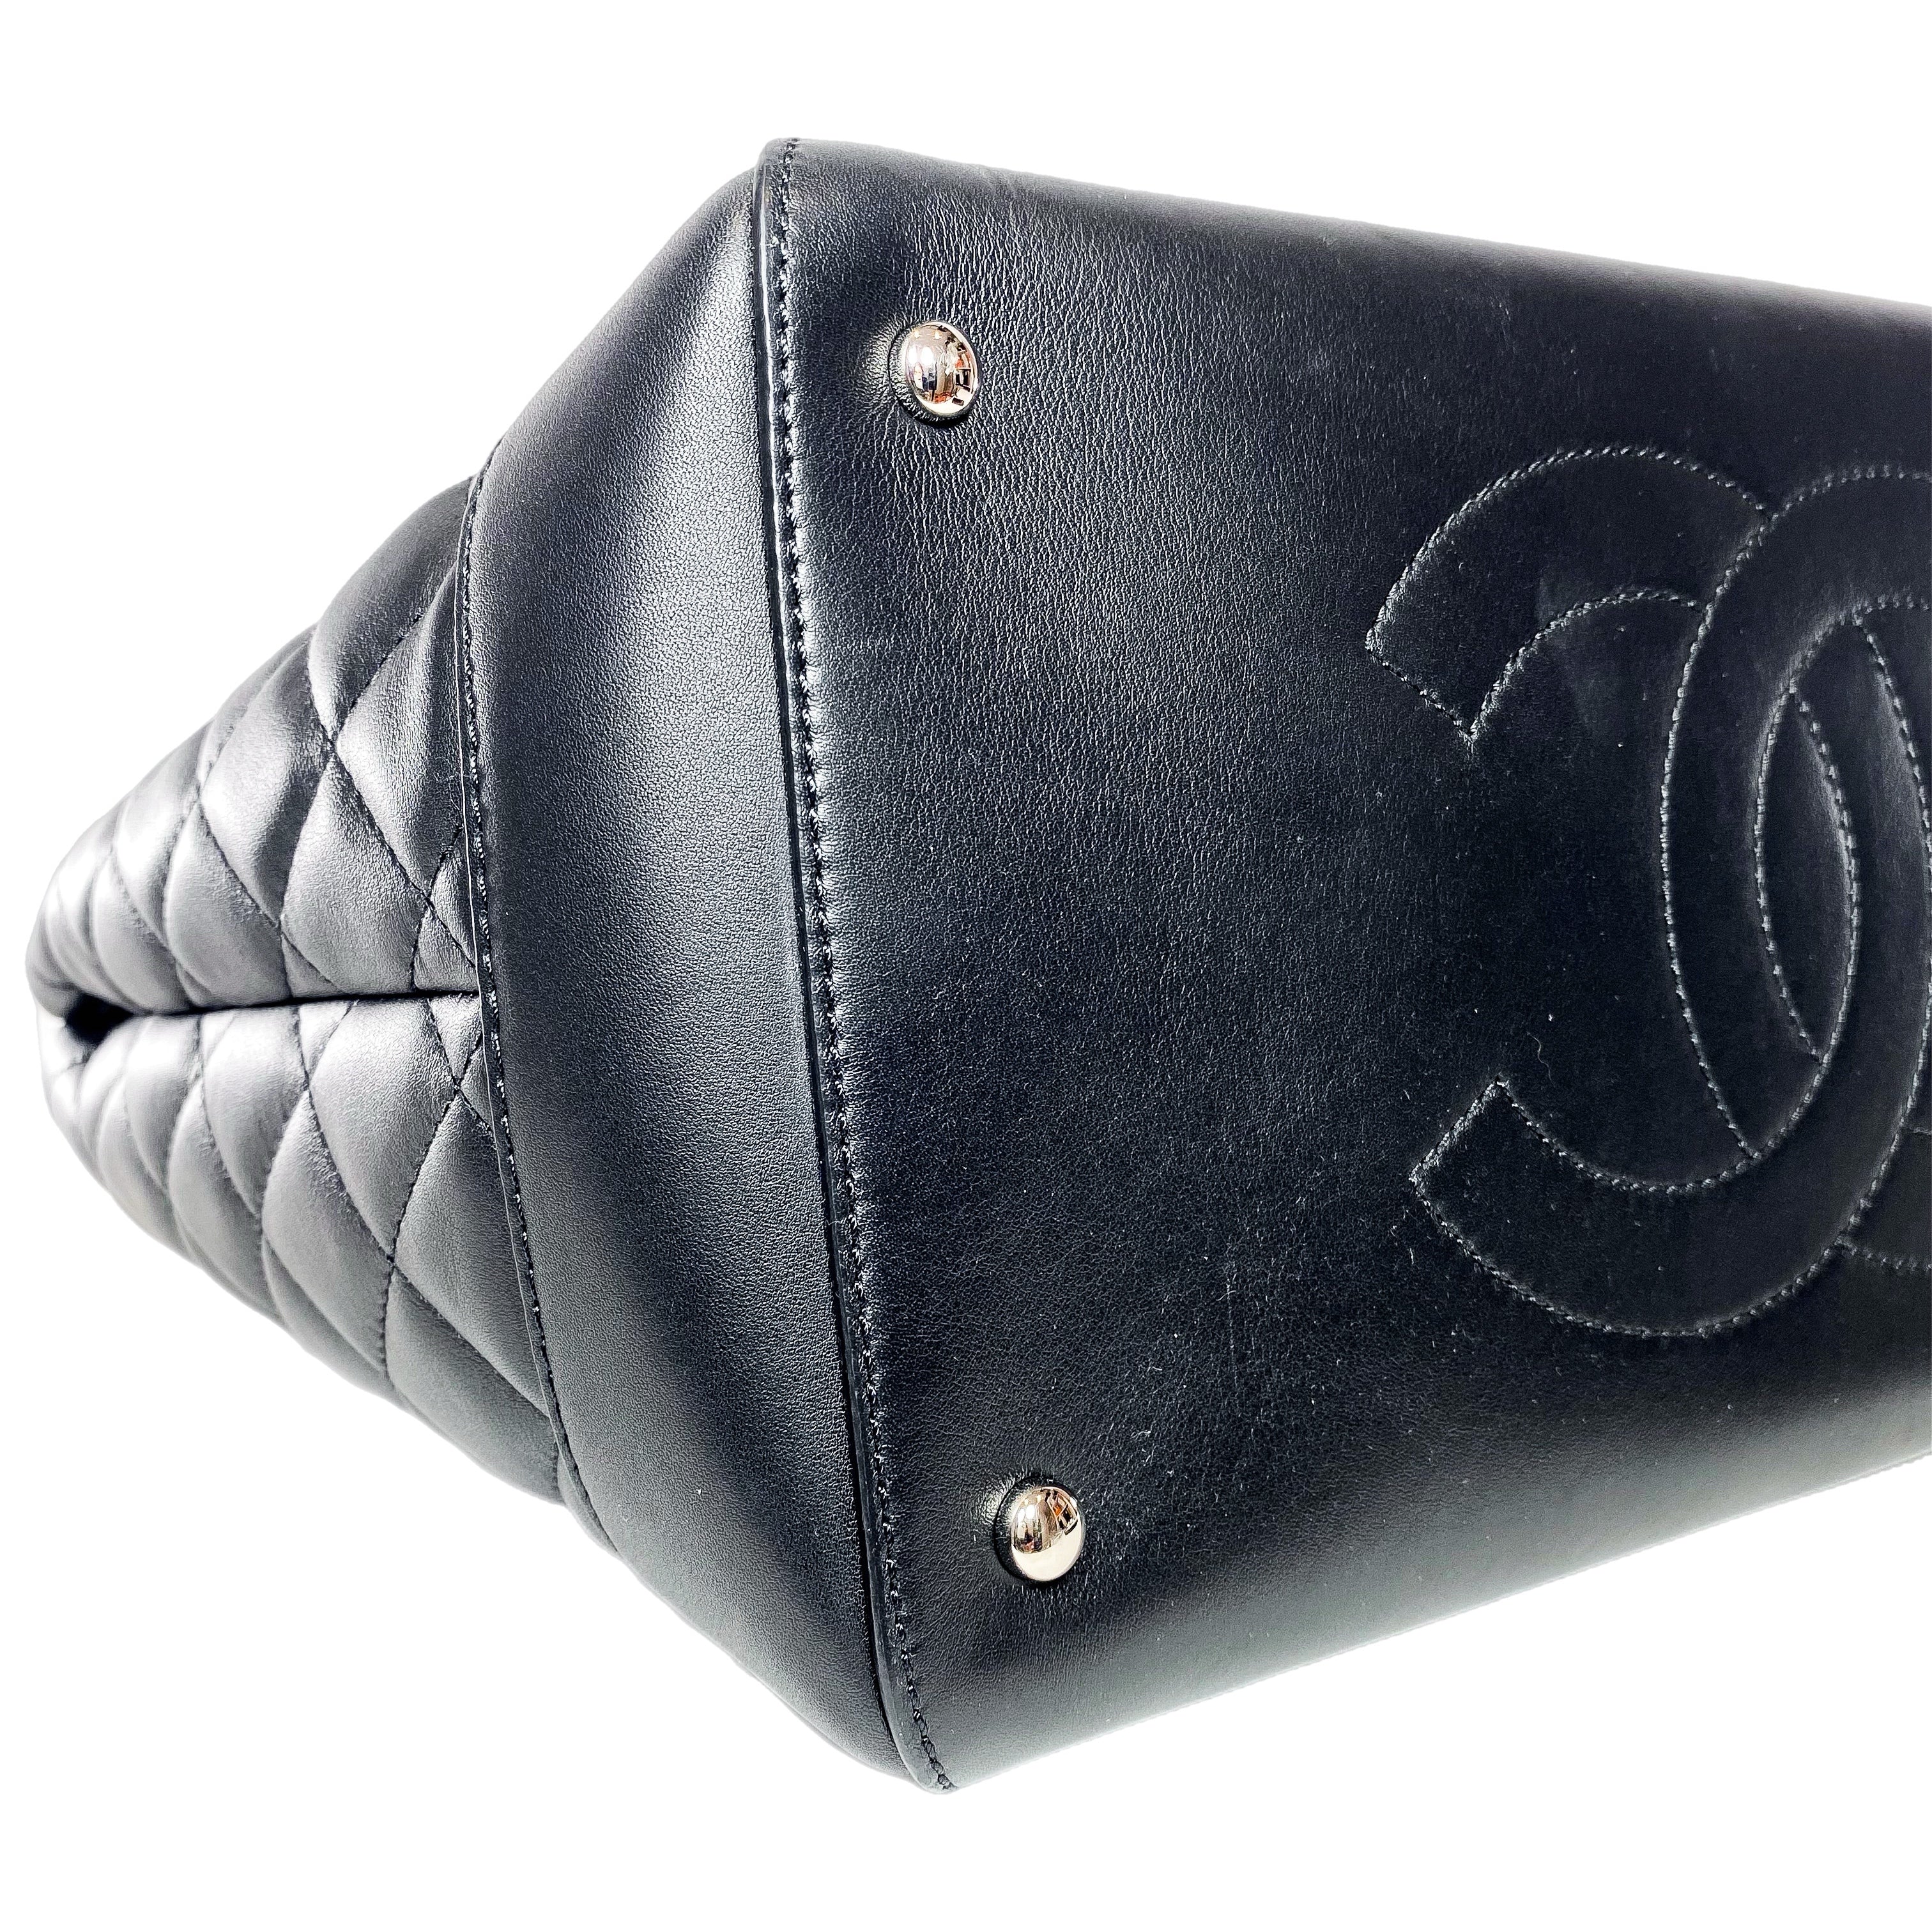 Chanel Black Small Easy Shopping Tote